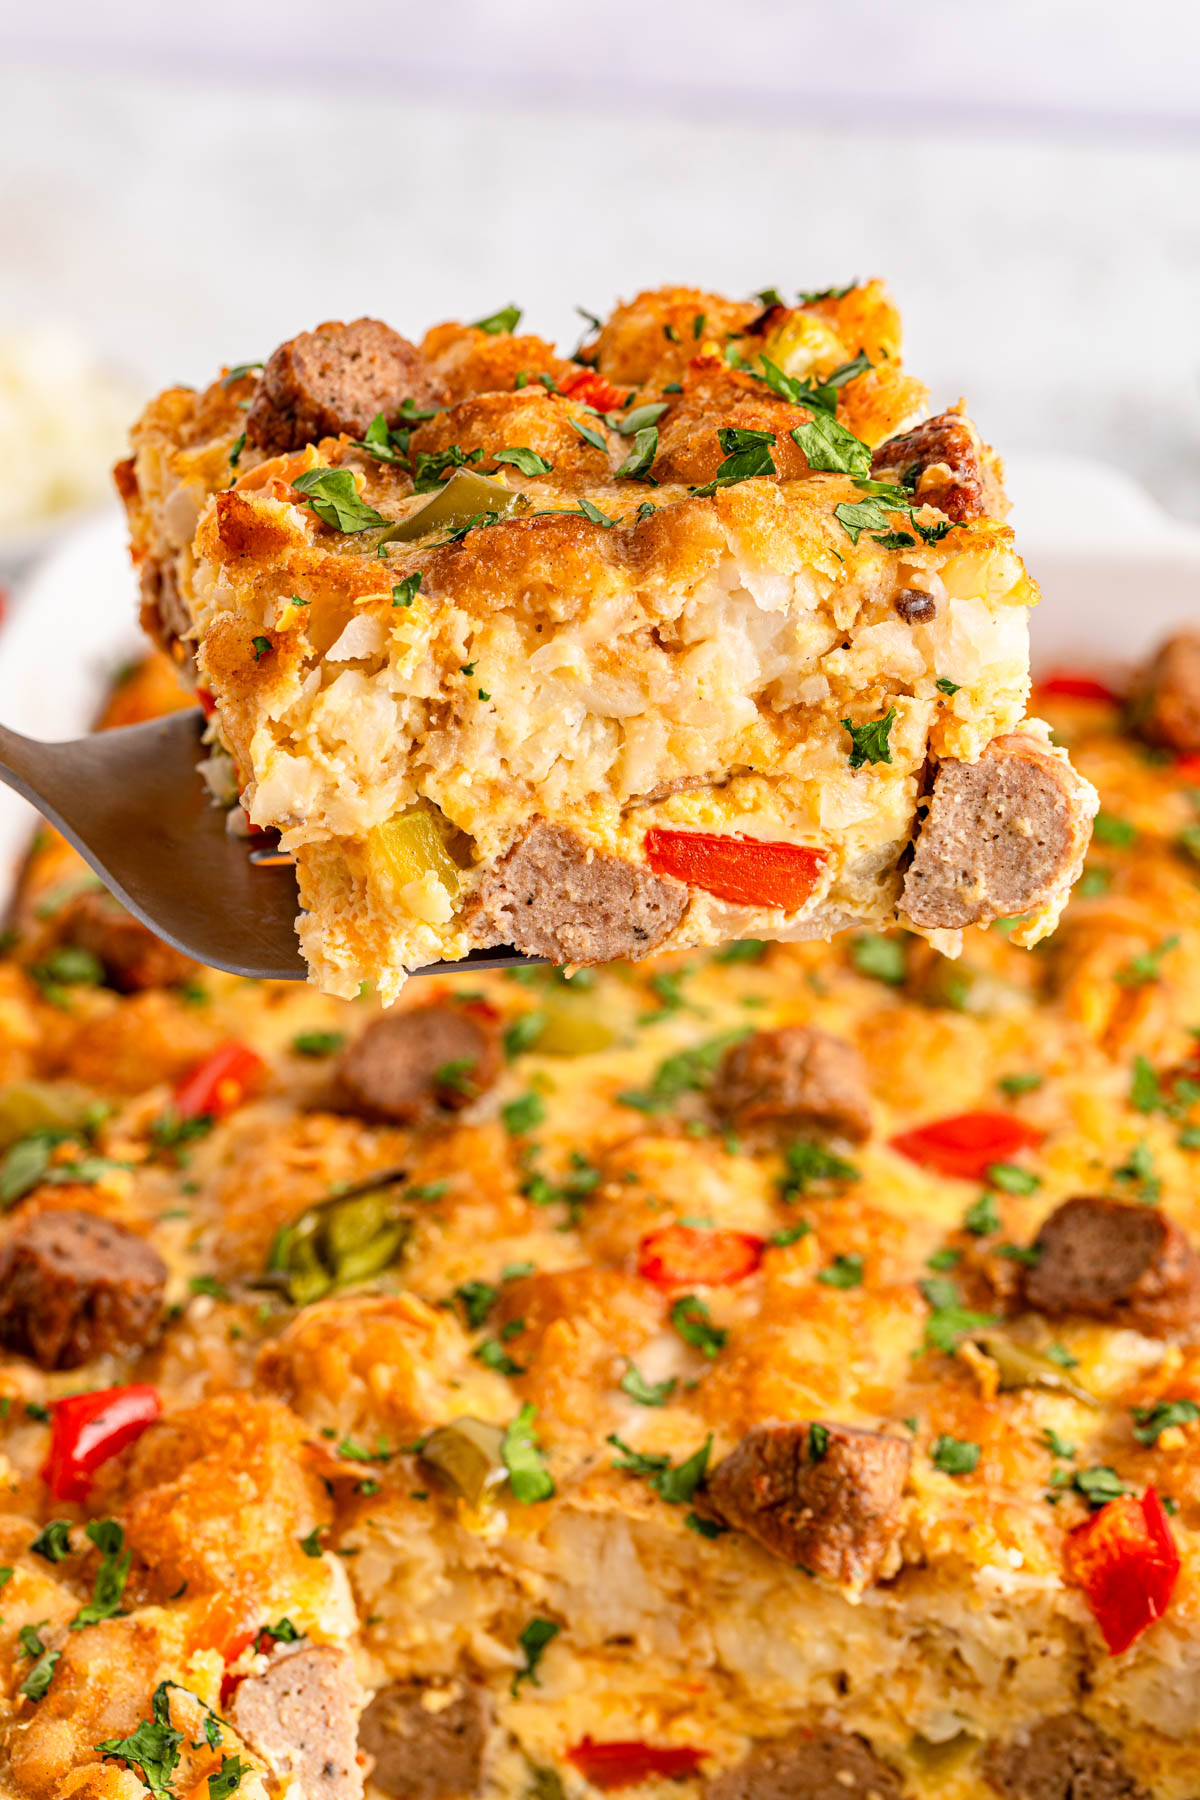 A slice of savory breakfast casserole with sausage, peppers, and eggs being lifted on a spatula.